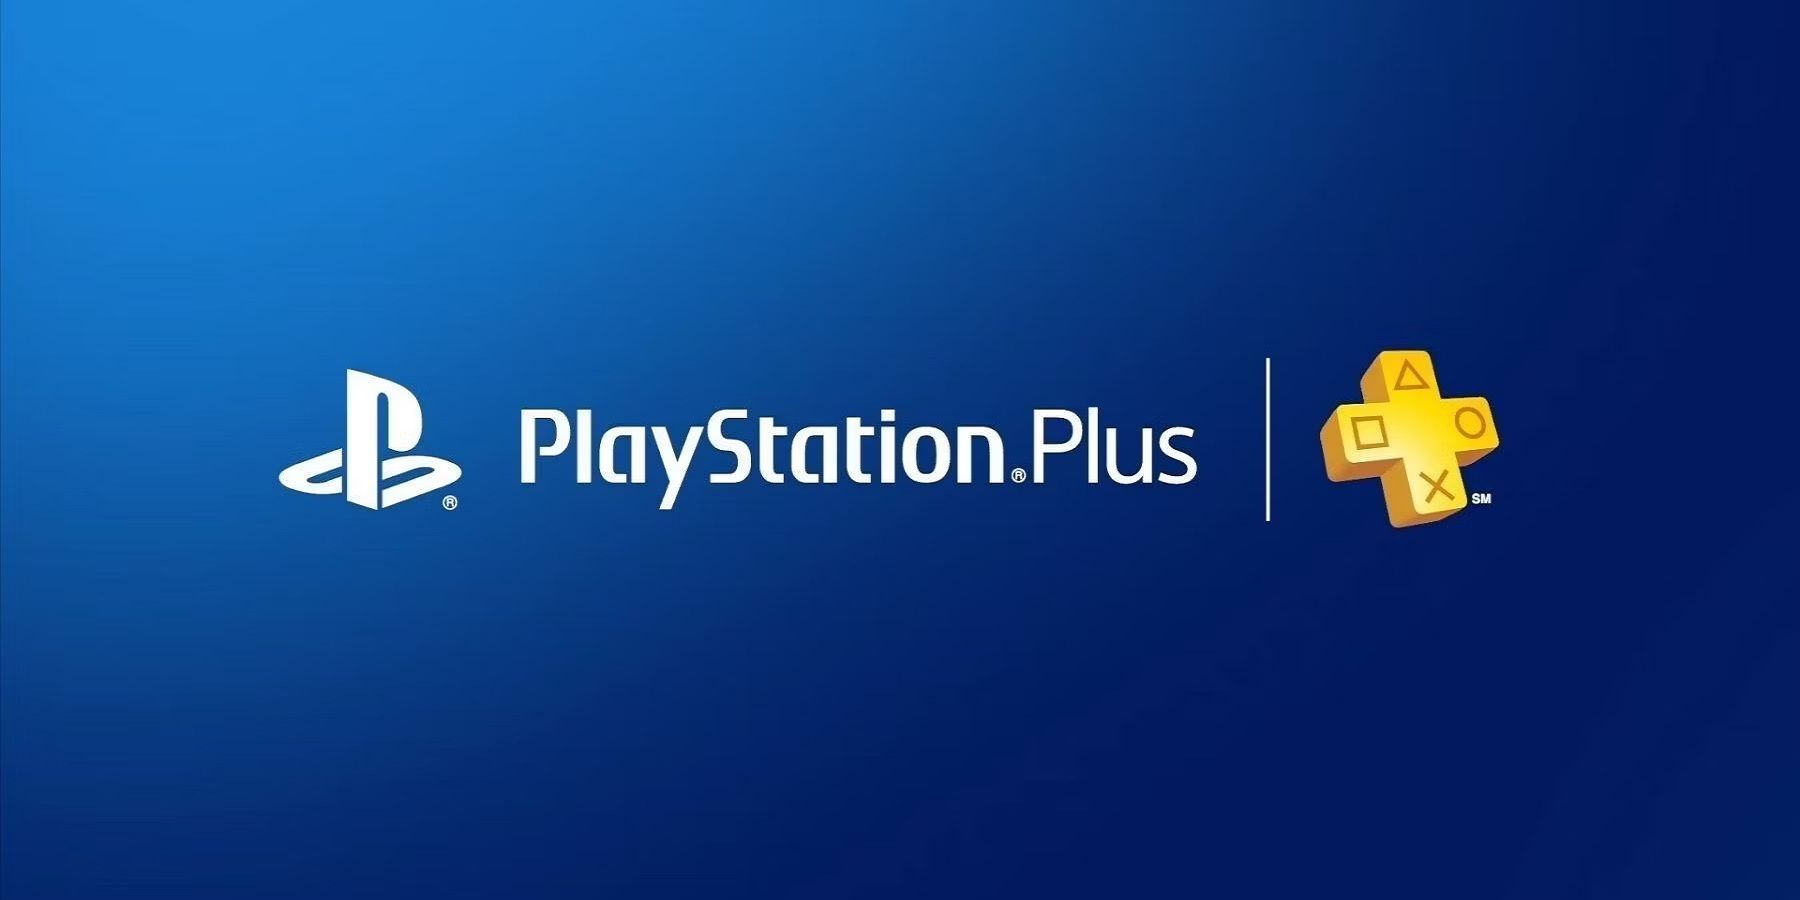 PlayStation Plus Monthly Games - October 2023: The Calisto